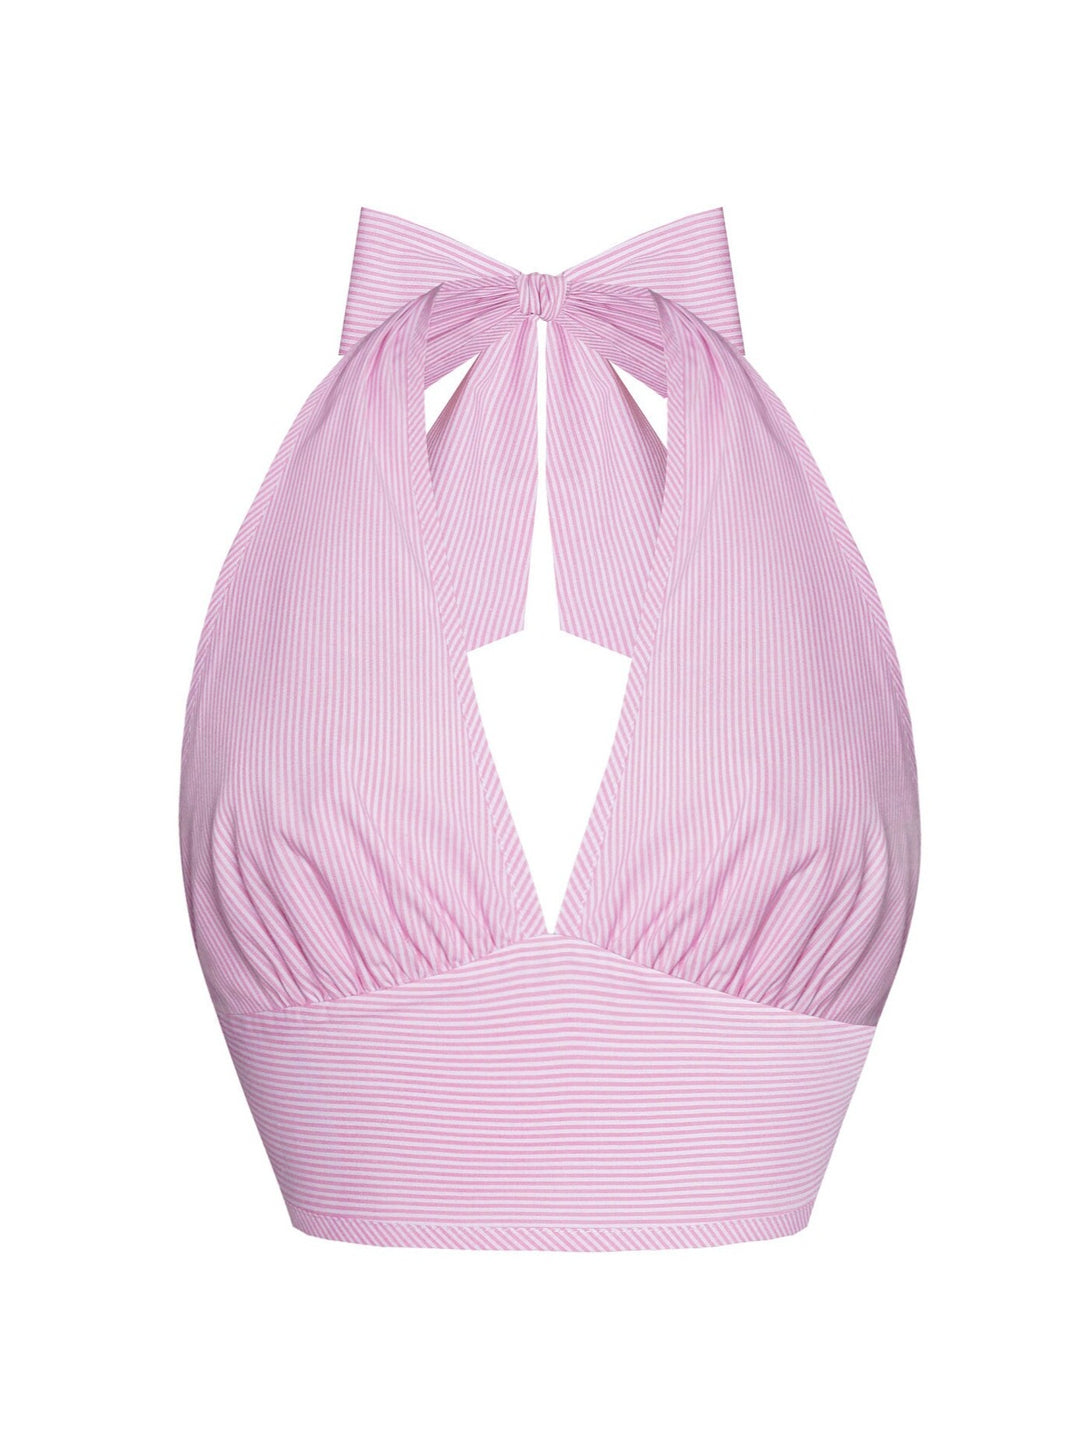 RTS - Size S - Ginger Top Only Pink "Pinstripe Mini-Stripe"